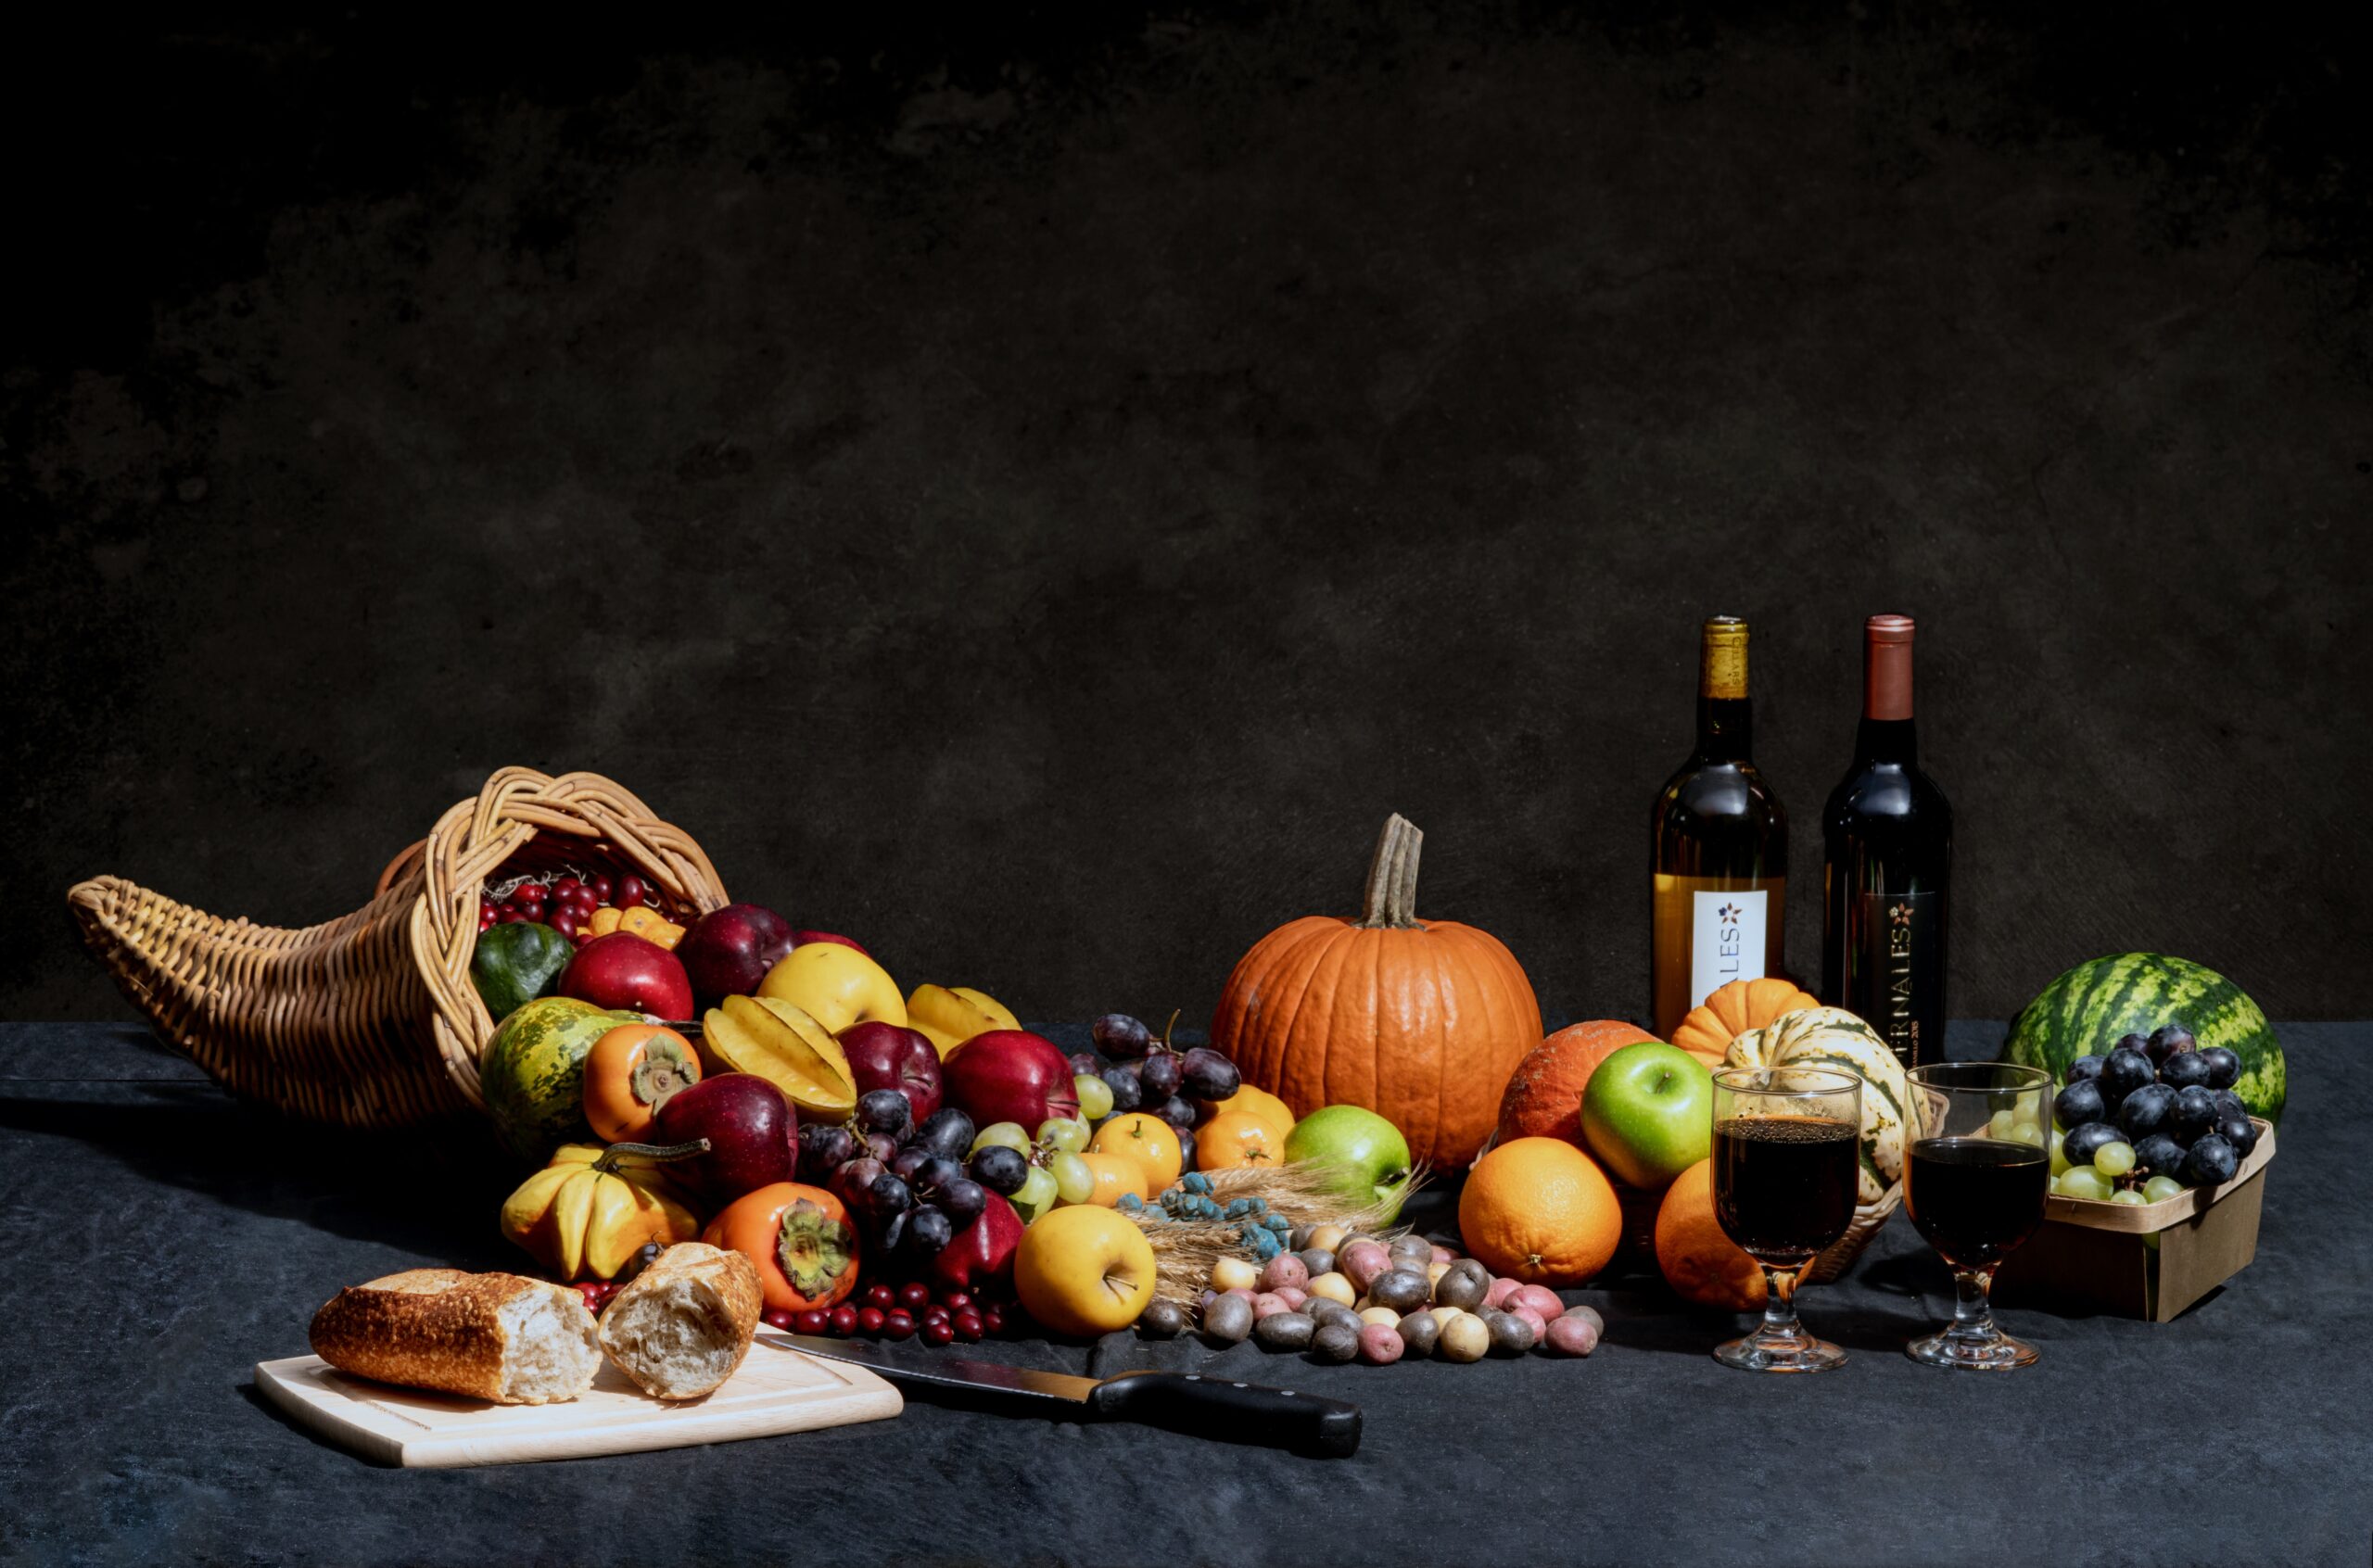 An assortment of wine and fruits